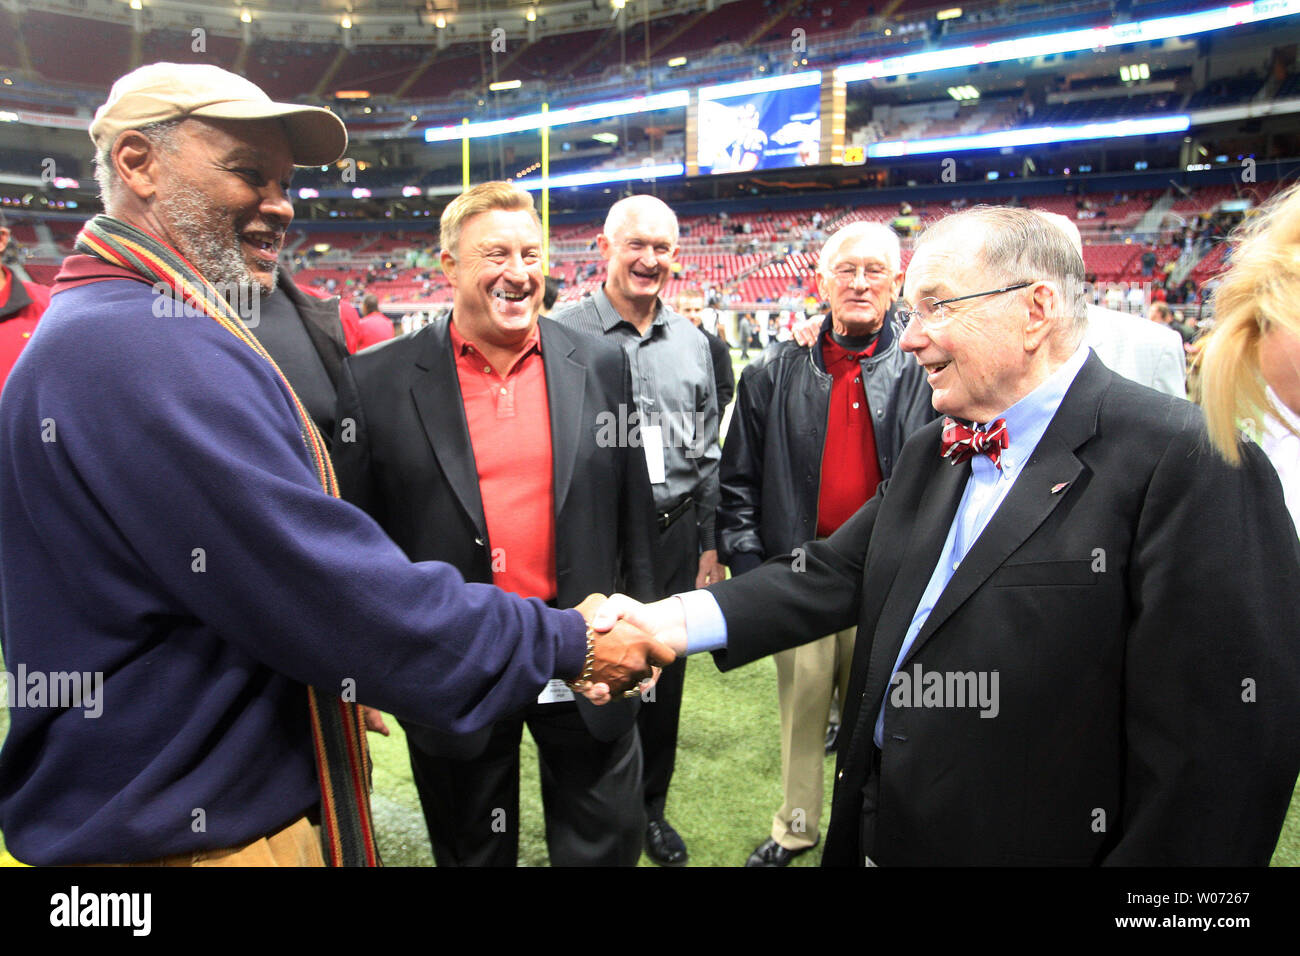 Members of the old St. Louis Football Cardinals ( L to R) Johnny Roland, Jim Otis, Mark Arneson and Larry Wilson say hello to their old boss Arizona Cardinals team owner Bill Bidwell before the Arizona-St. Louis football game at the Edward Jones Dome in St. Louis on November 27, 2011   UPI/Bill Greenblatt Stock Photo